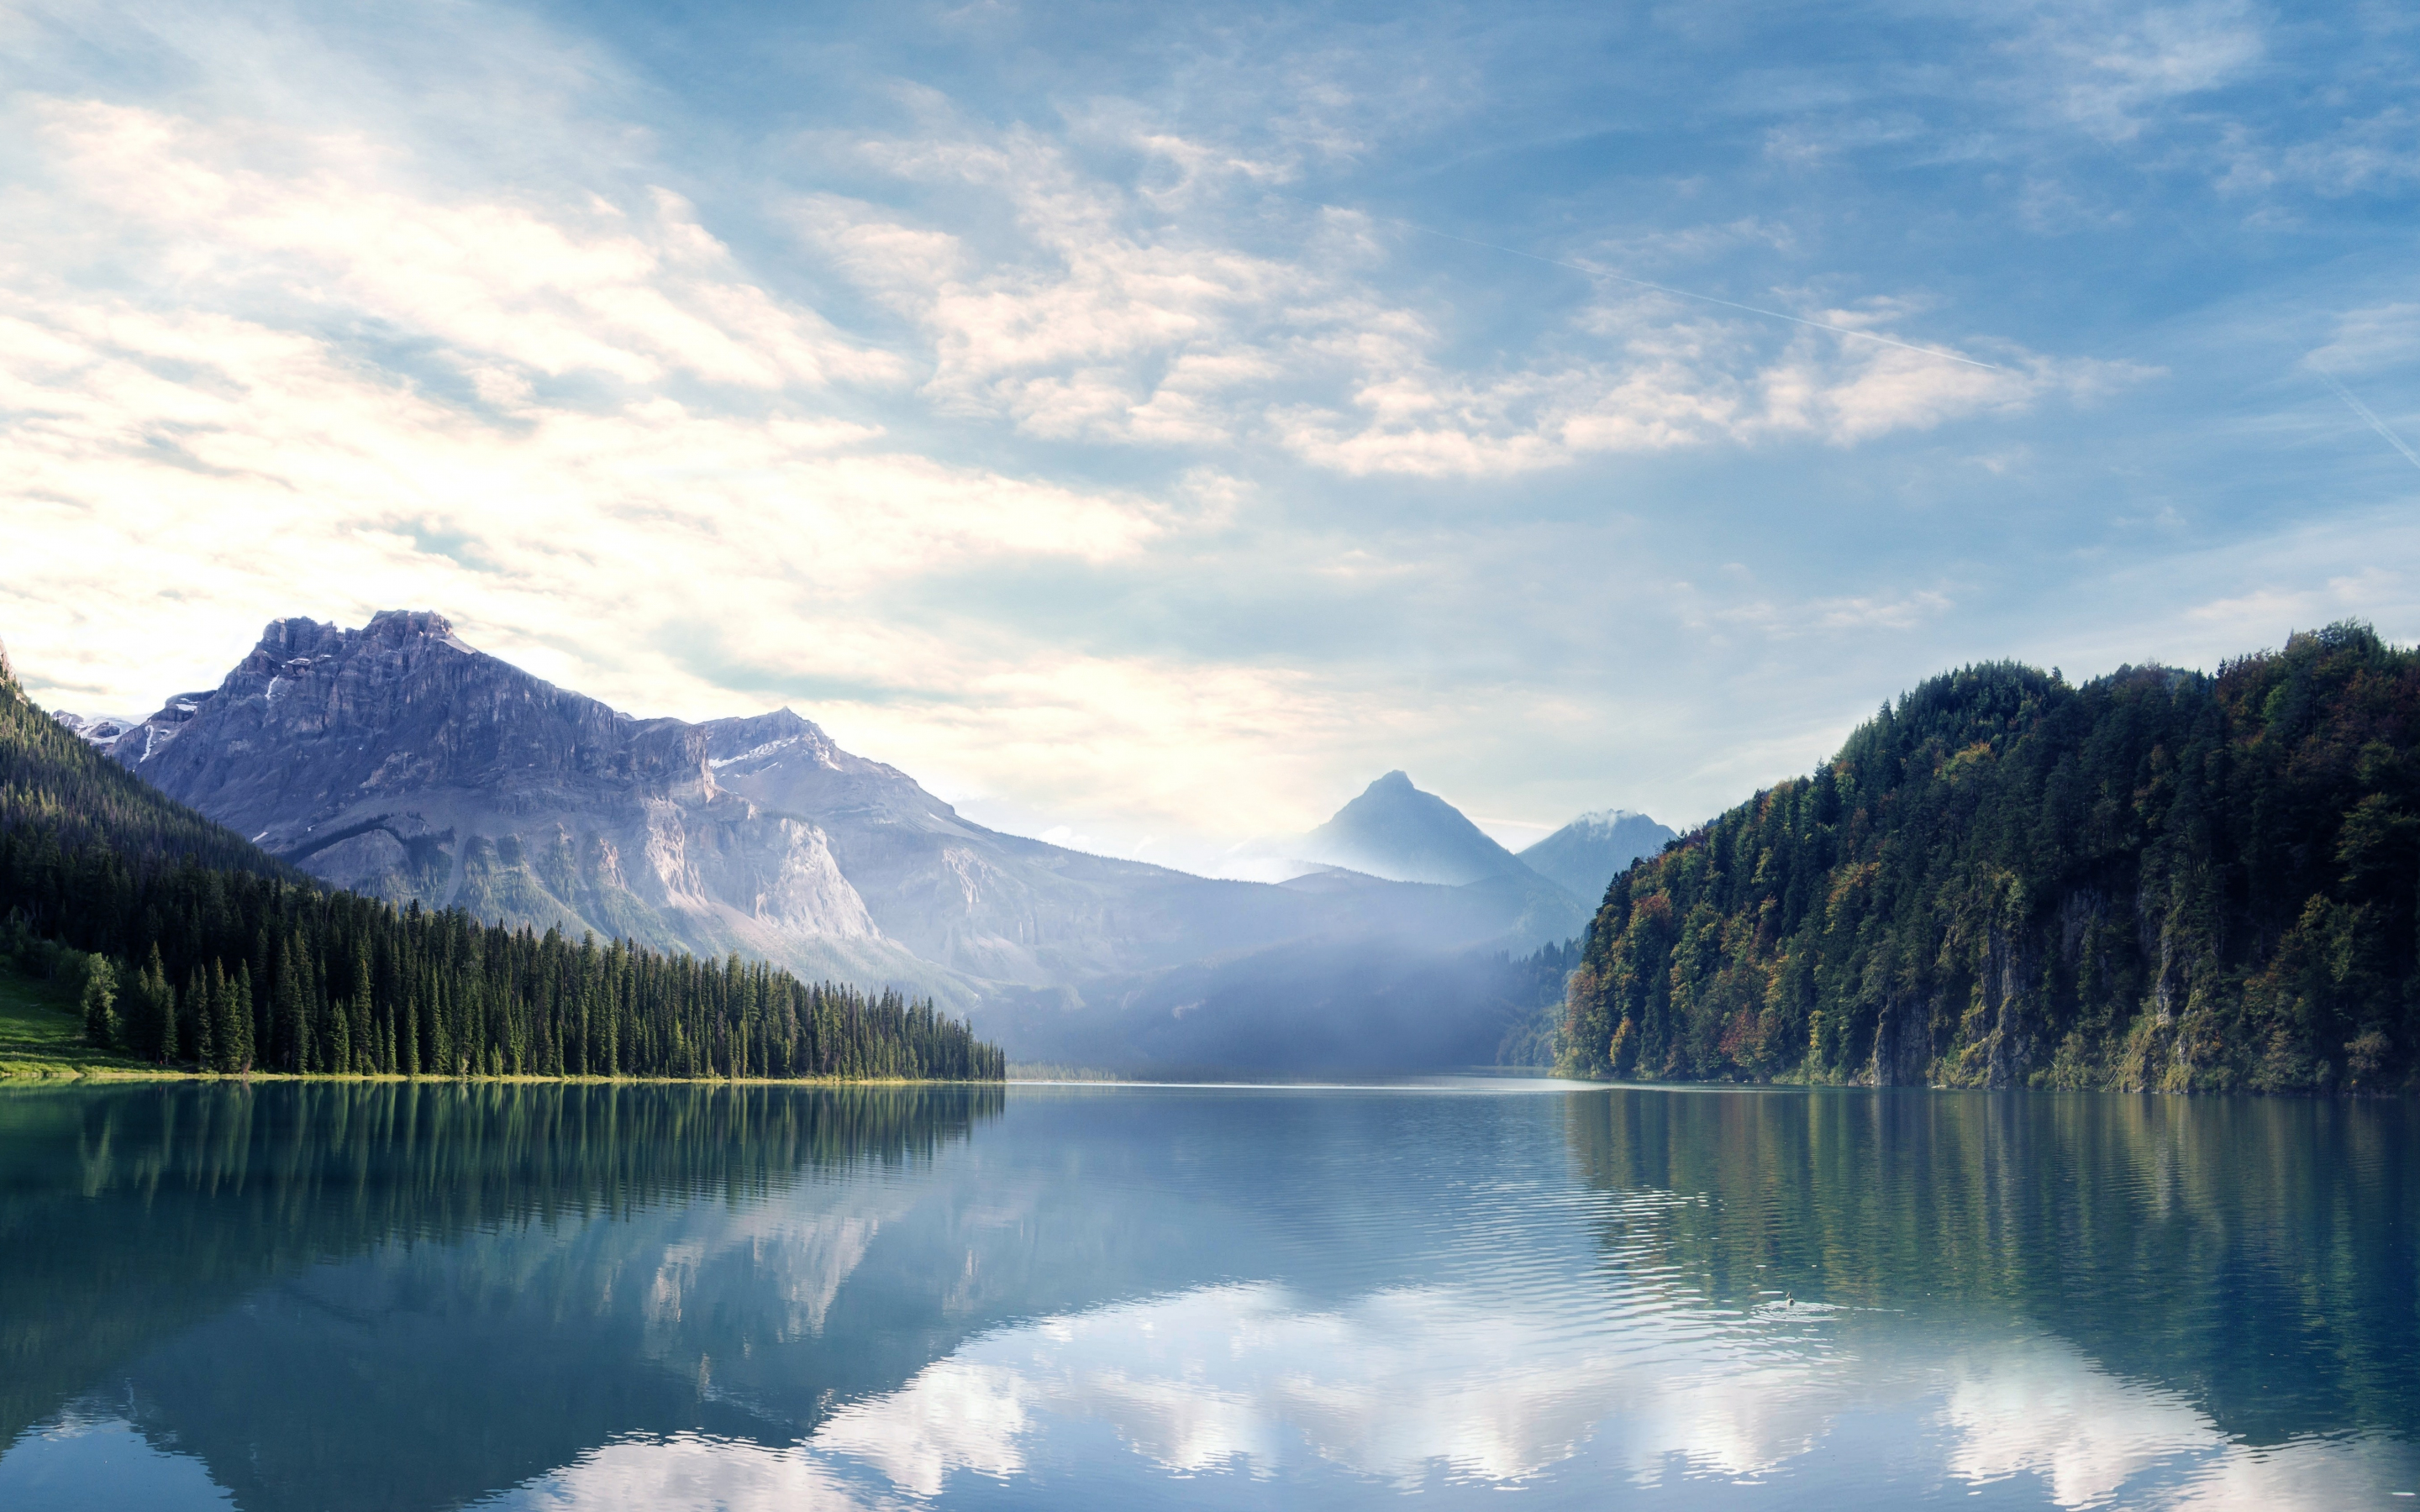 Lake, nature, mountains, forest, sky, trees, 2880x1800 wallpaper